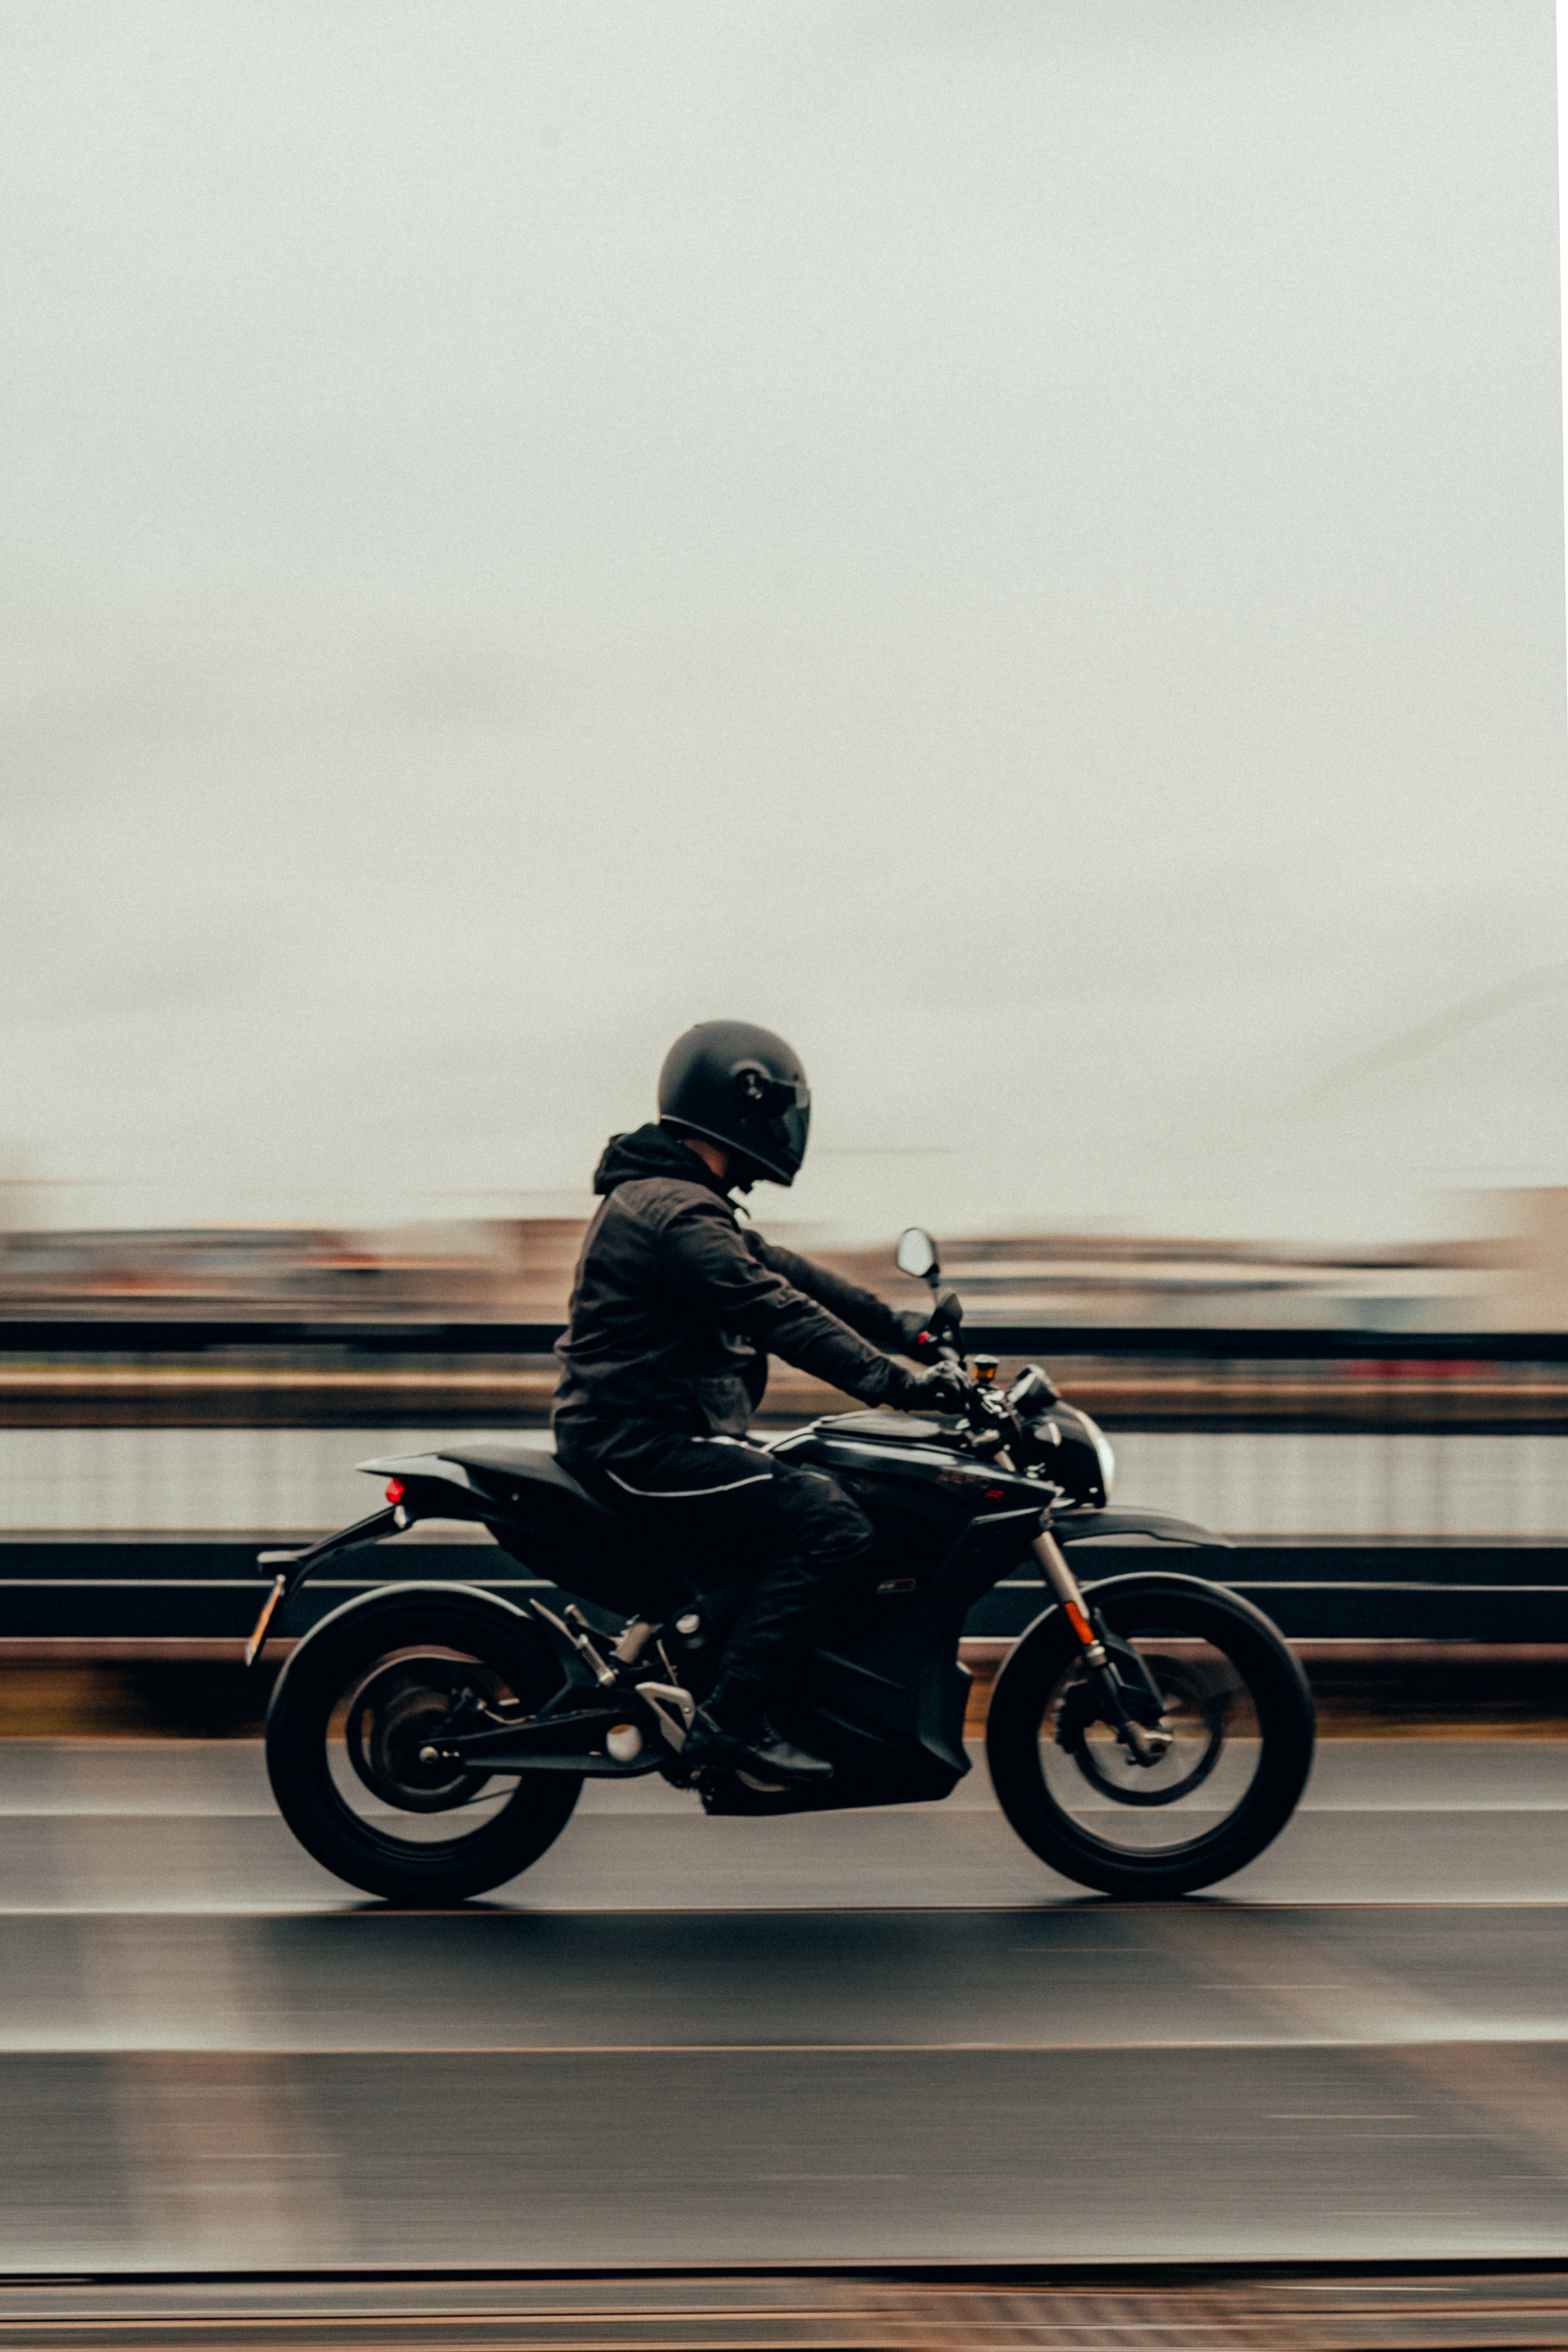 speed, motorcycles, traffic, movement, motorcyclist, motorcycle, race